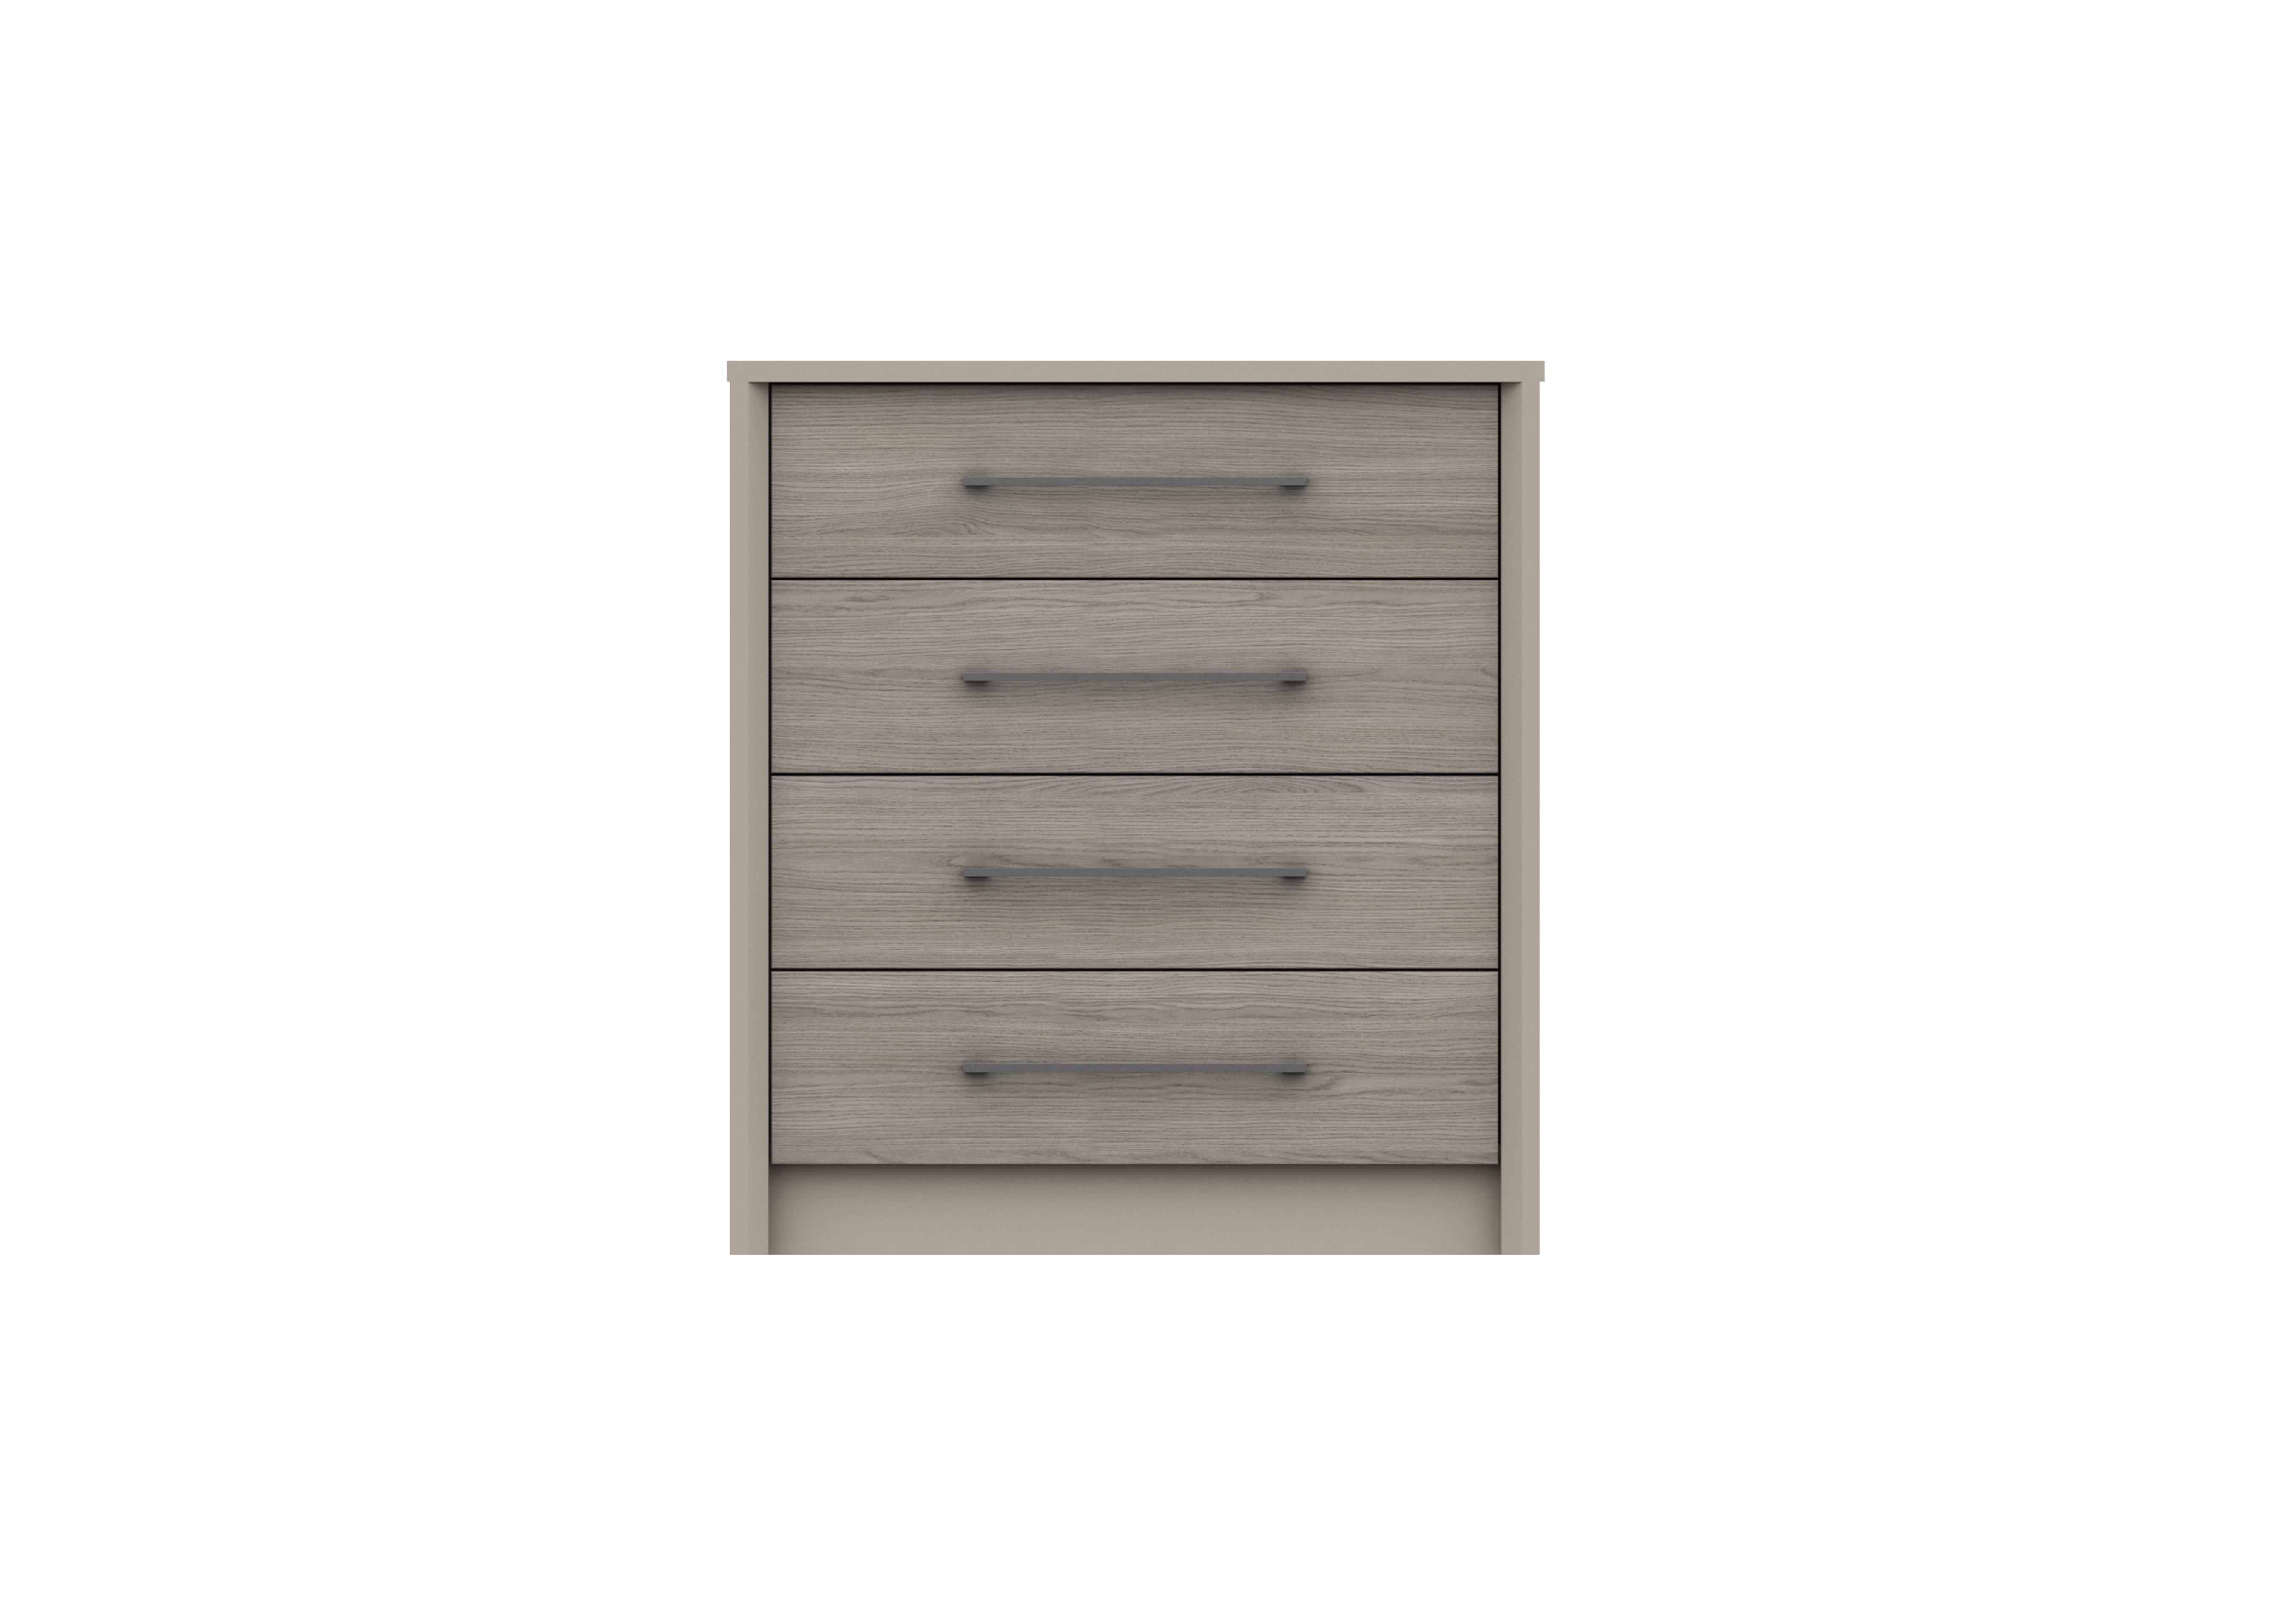 Paddington 4 Drawer Chest in Fired Earth/Grey Oak on Furniture Village